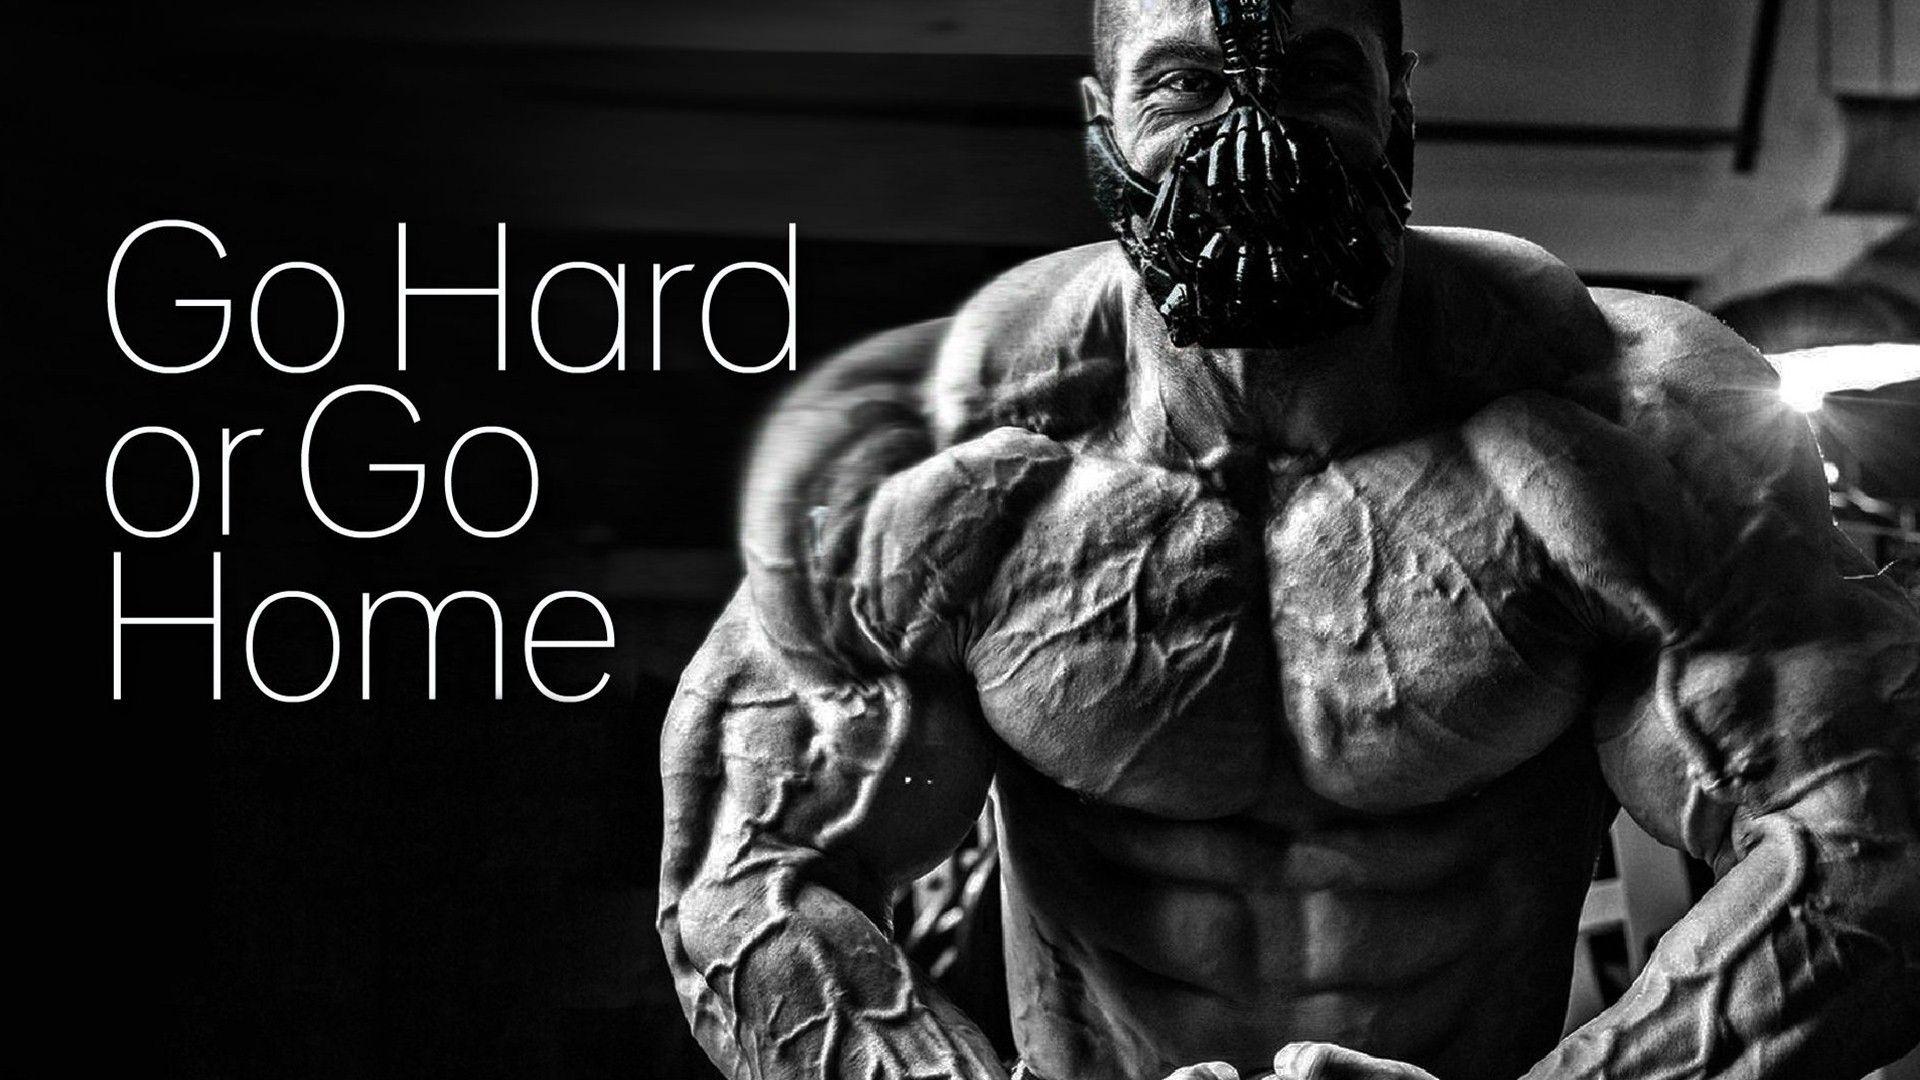 Best Motivational Gym Quotes HD Wallpapers 00233